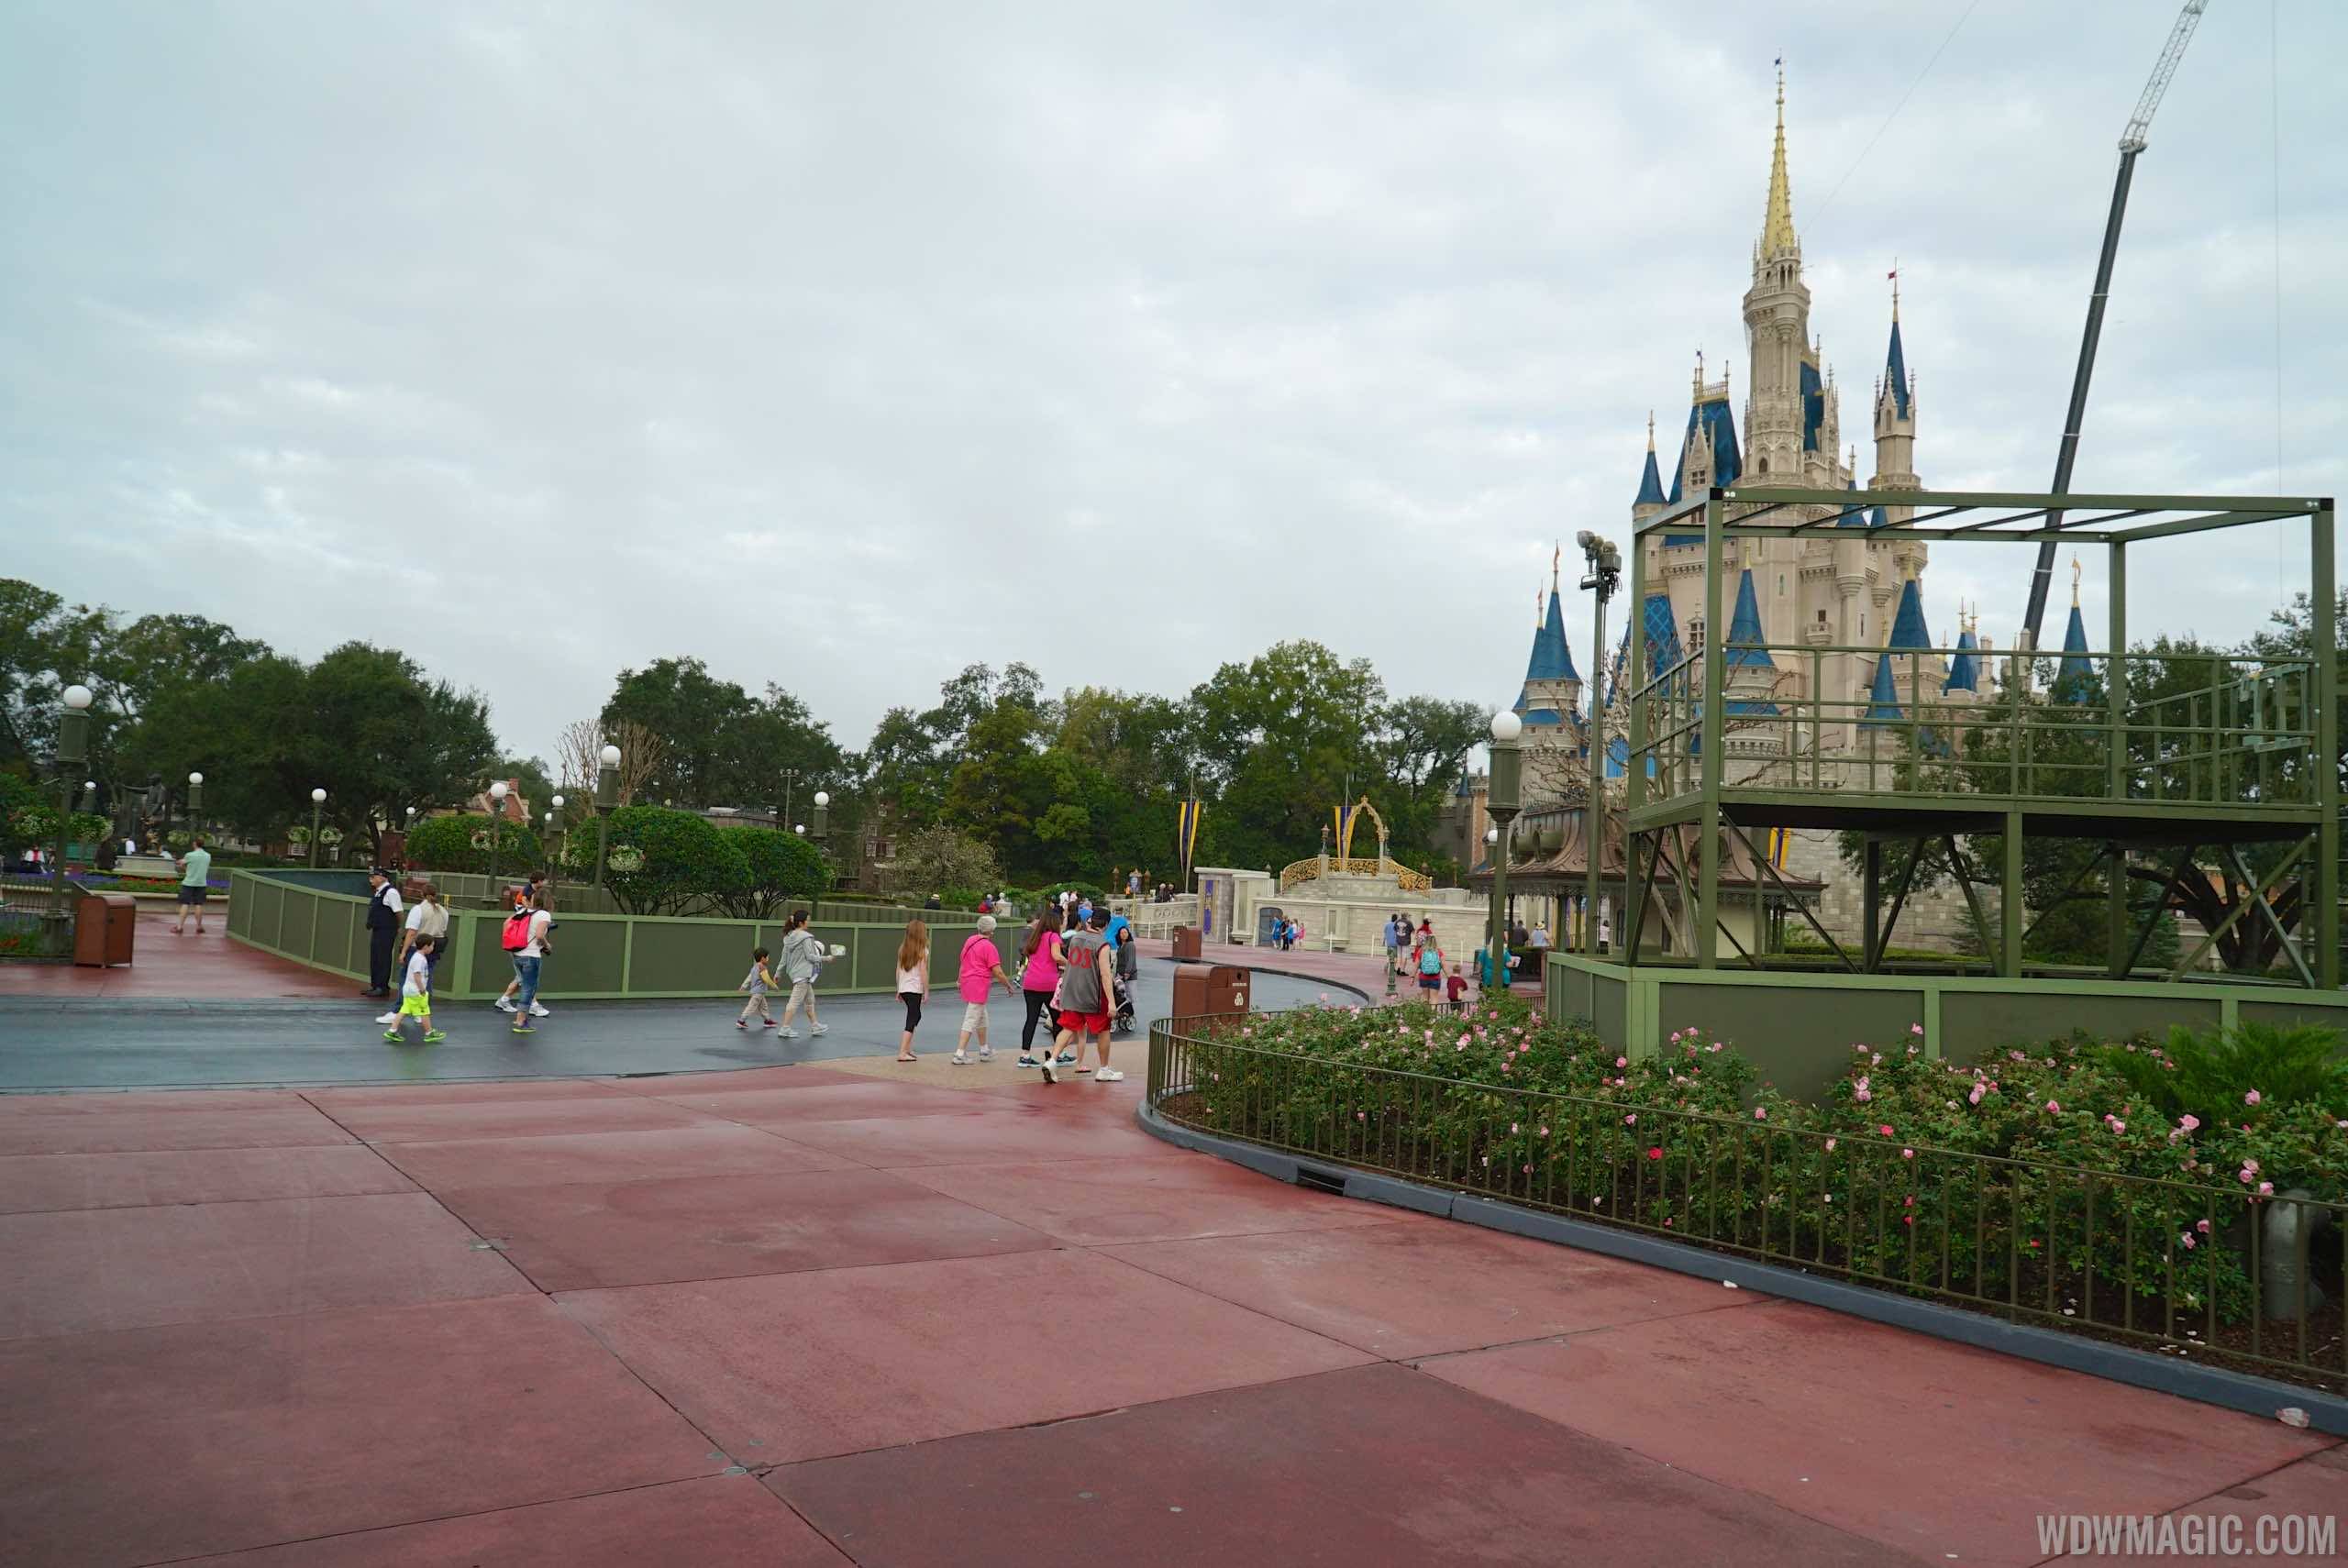 PHOTOS - Construction walls up around the center of the hub area at the Magic Kingdom